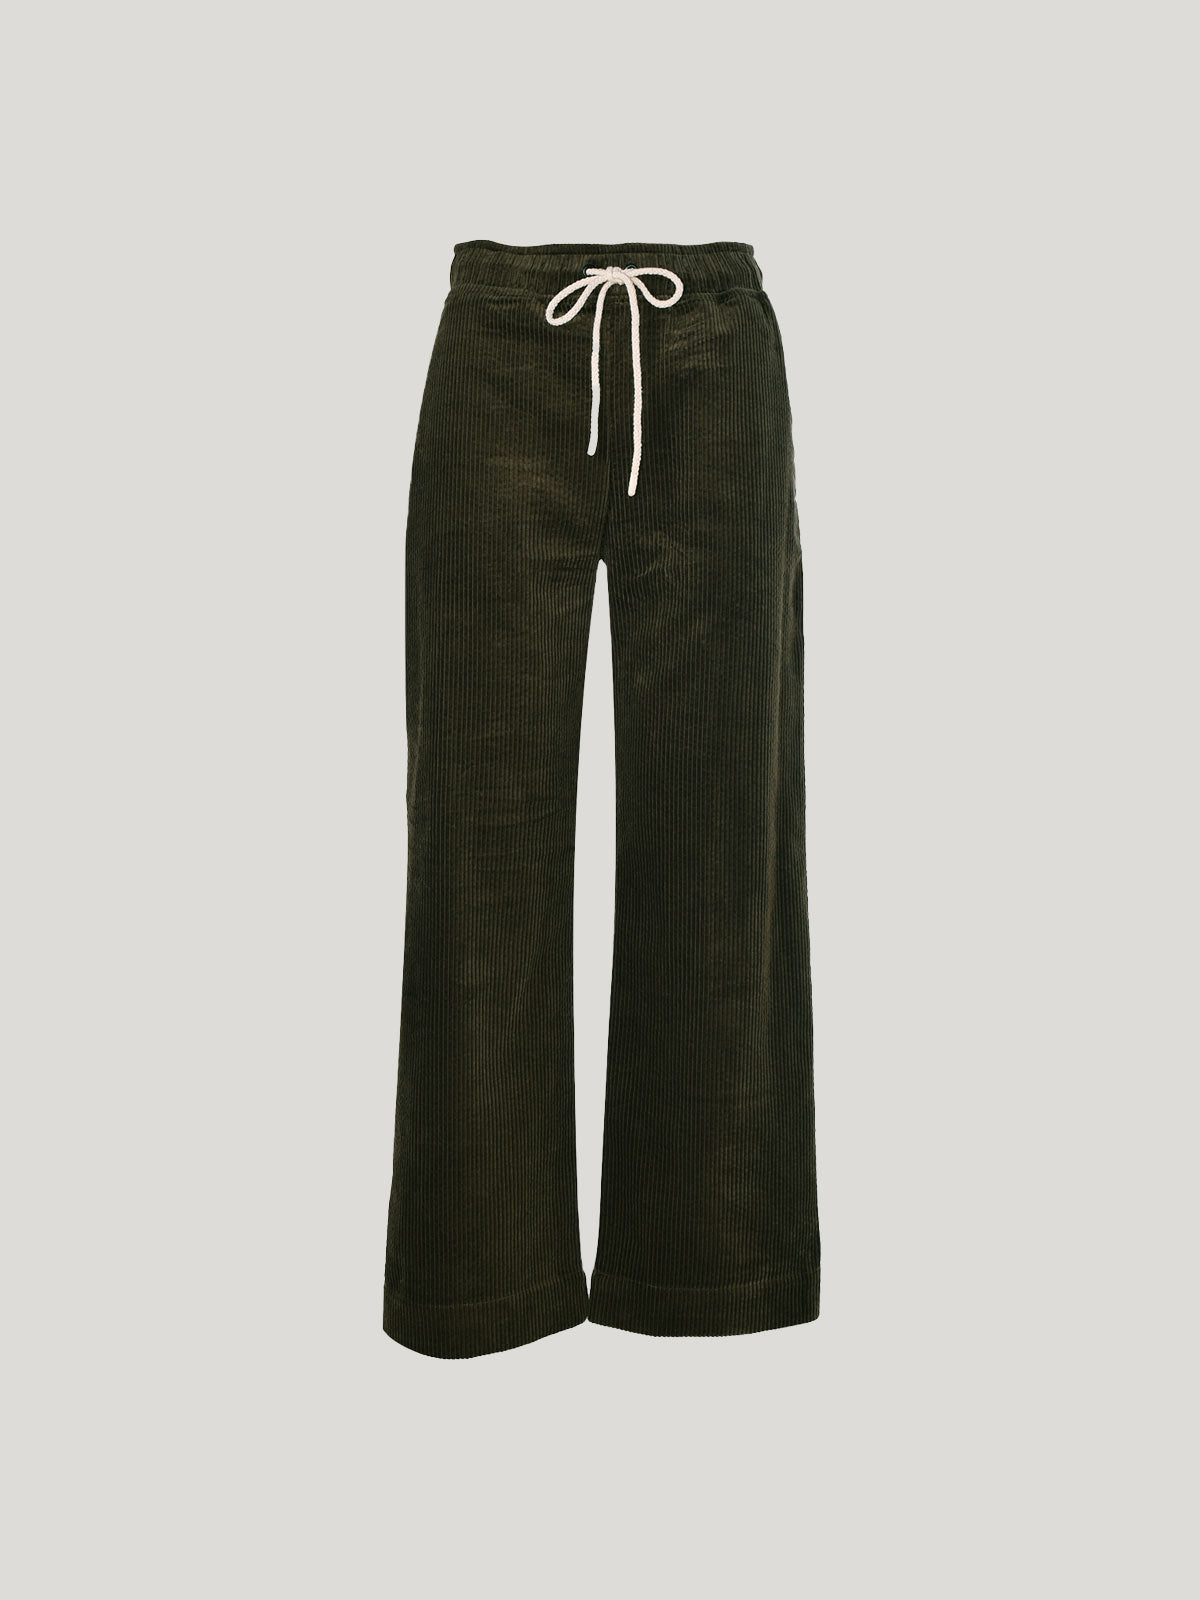 Evie Cord Pant